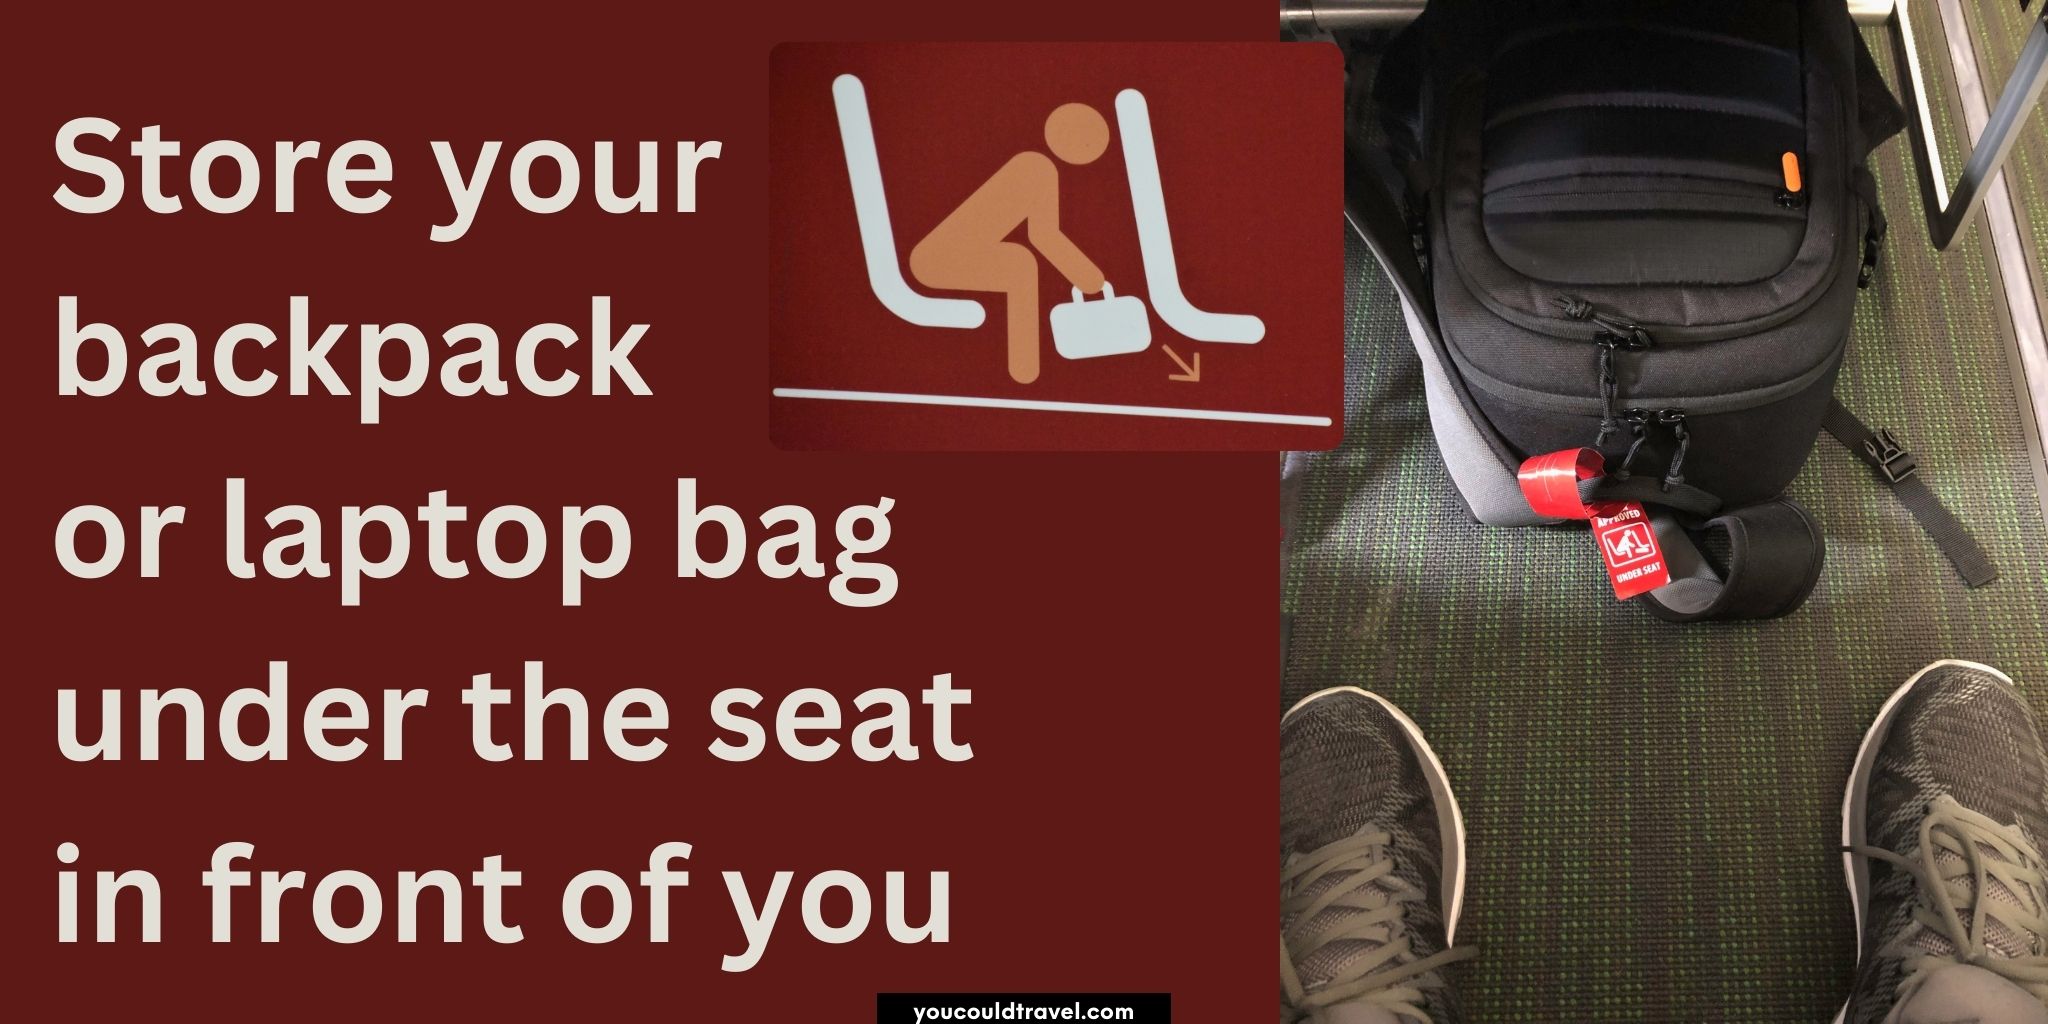 Store your bag under the seat